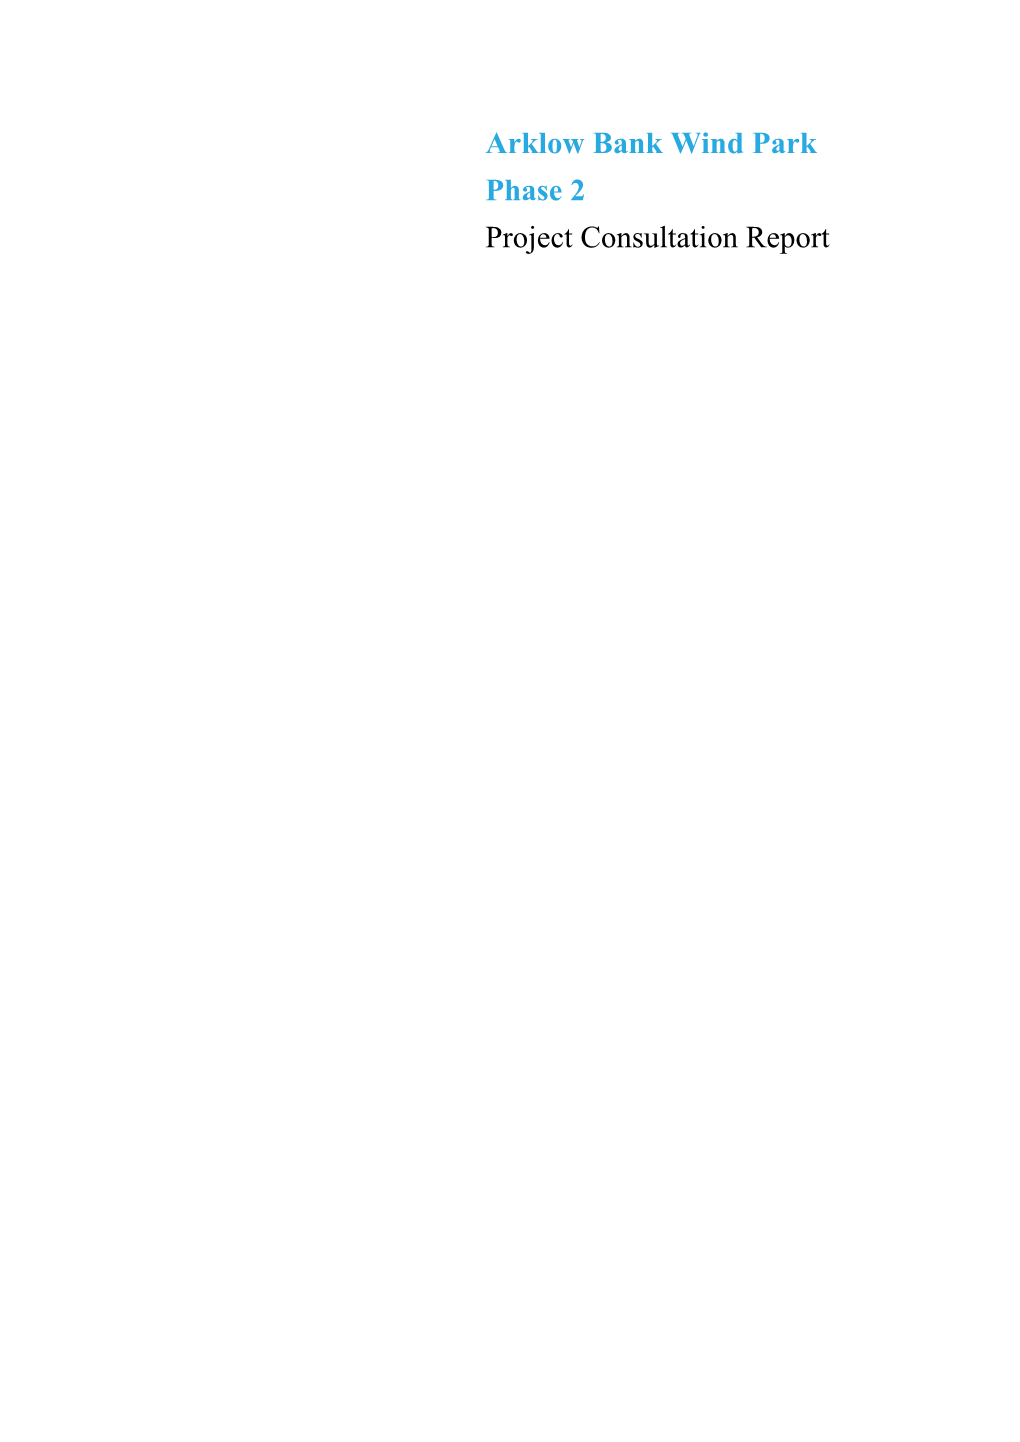 Arklow Bank Wind Park Phase 2 Project Consultation Report